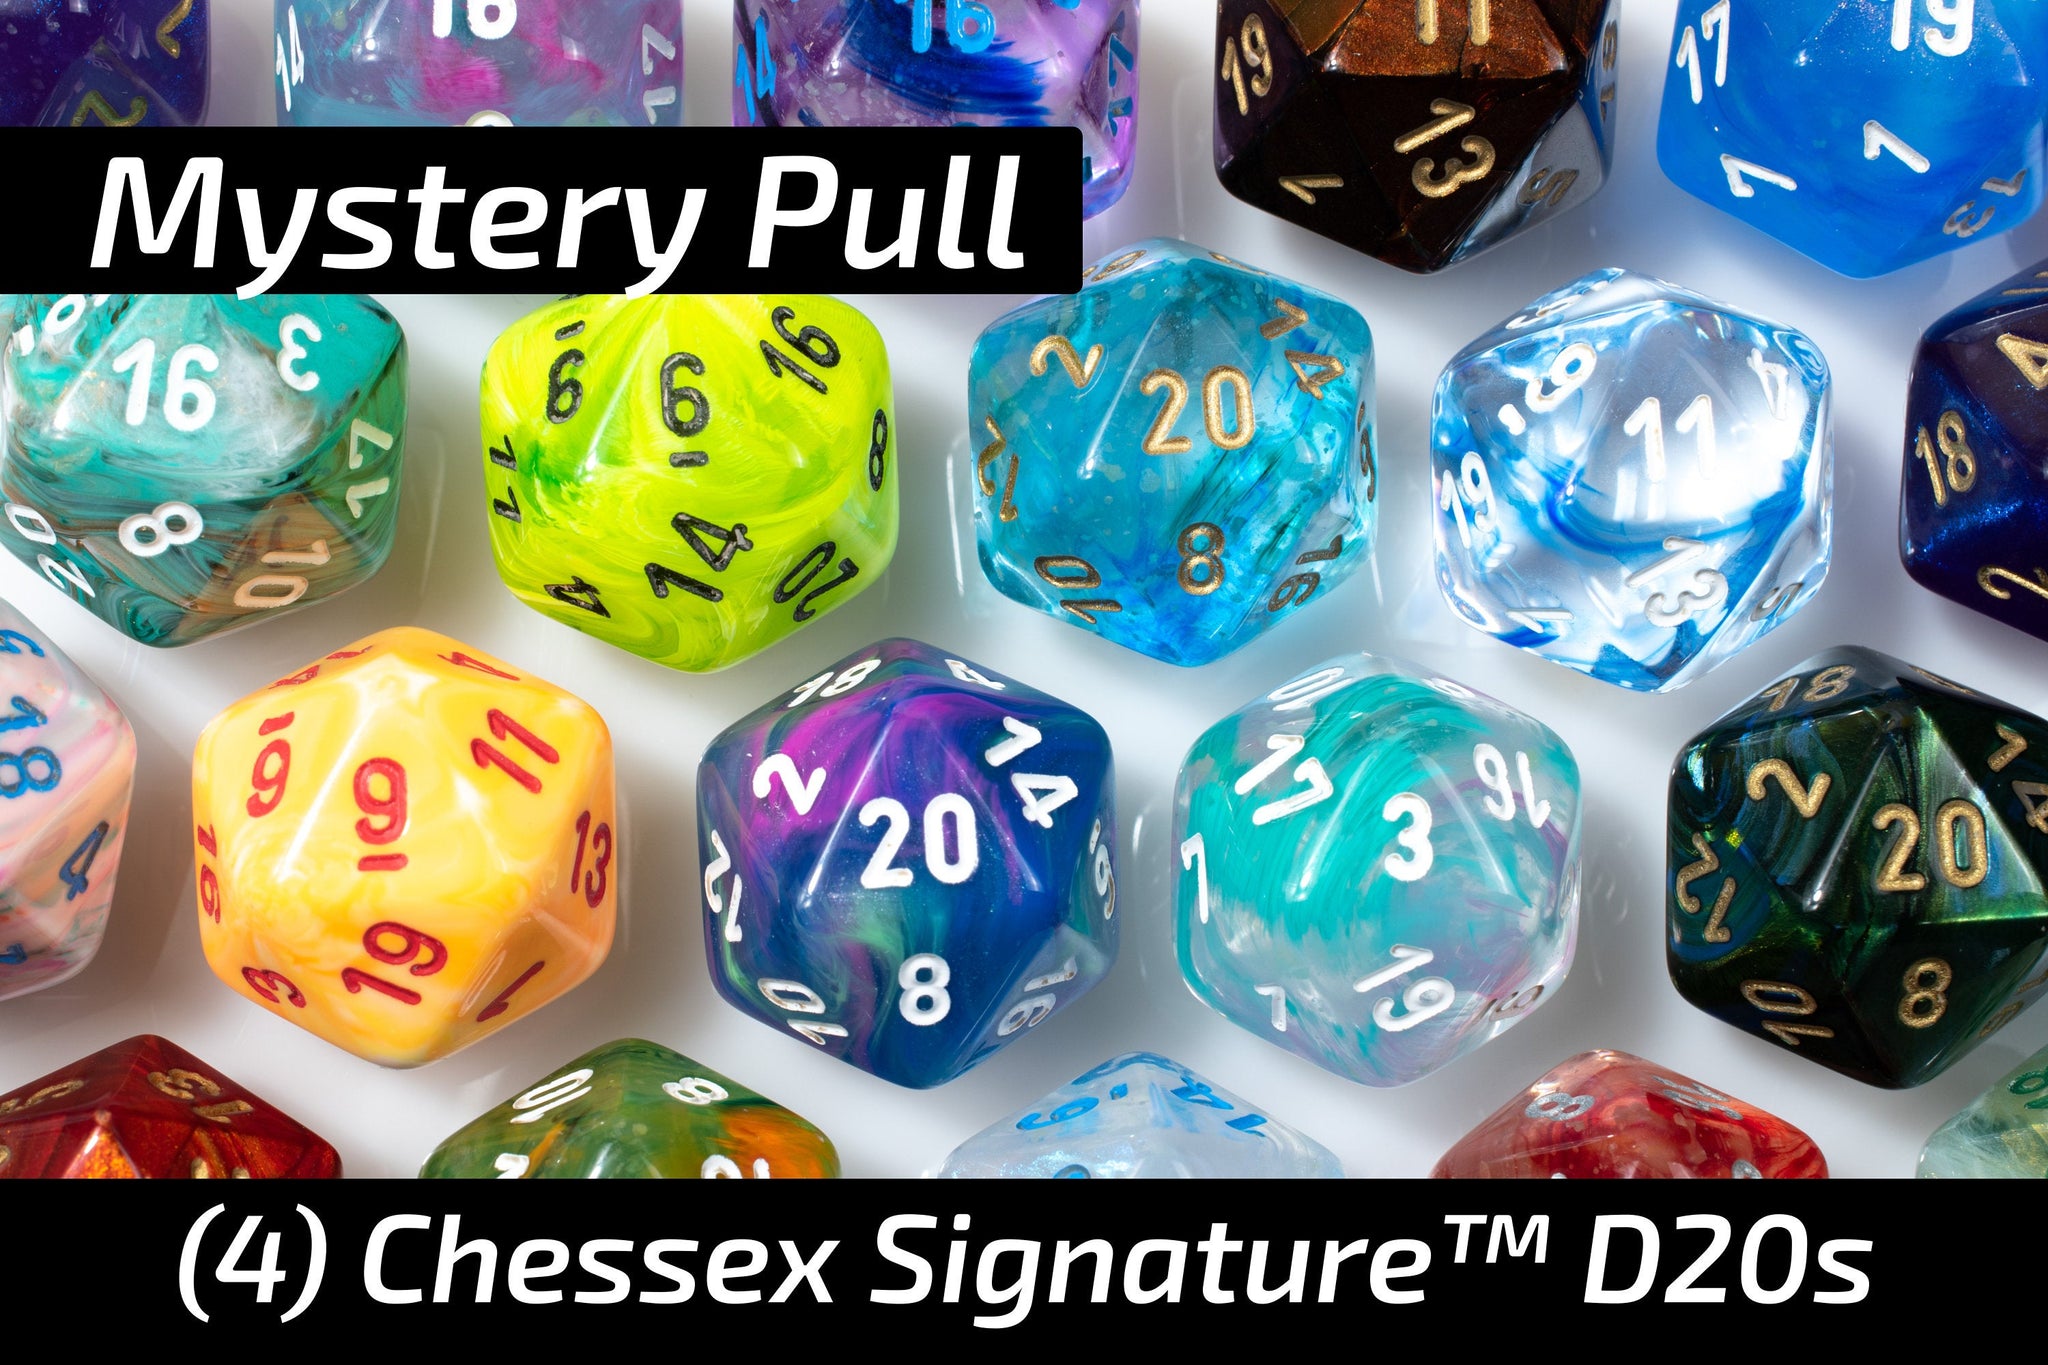 Mystery Pull | (4) Random Polyhedral D20s | Chessex Signature Dice